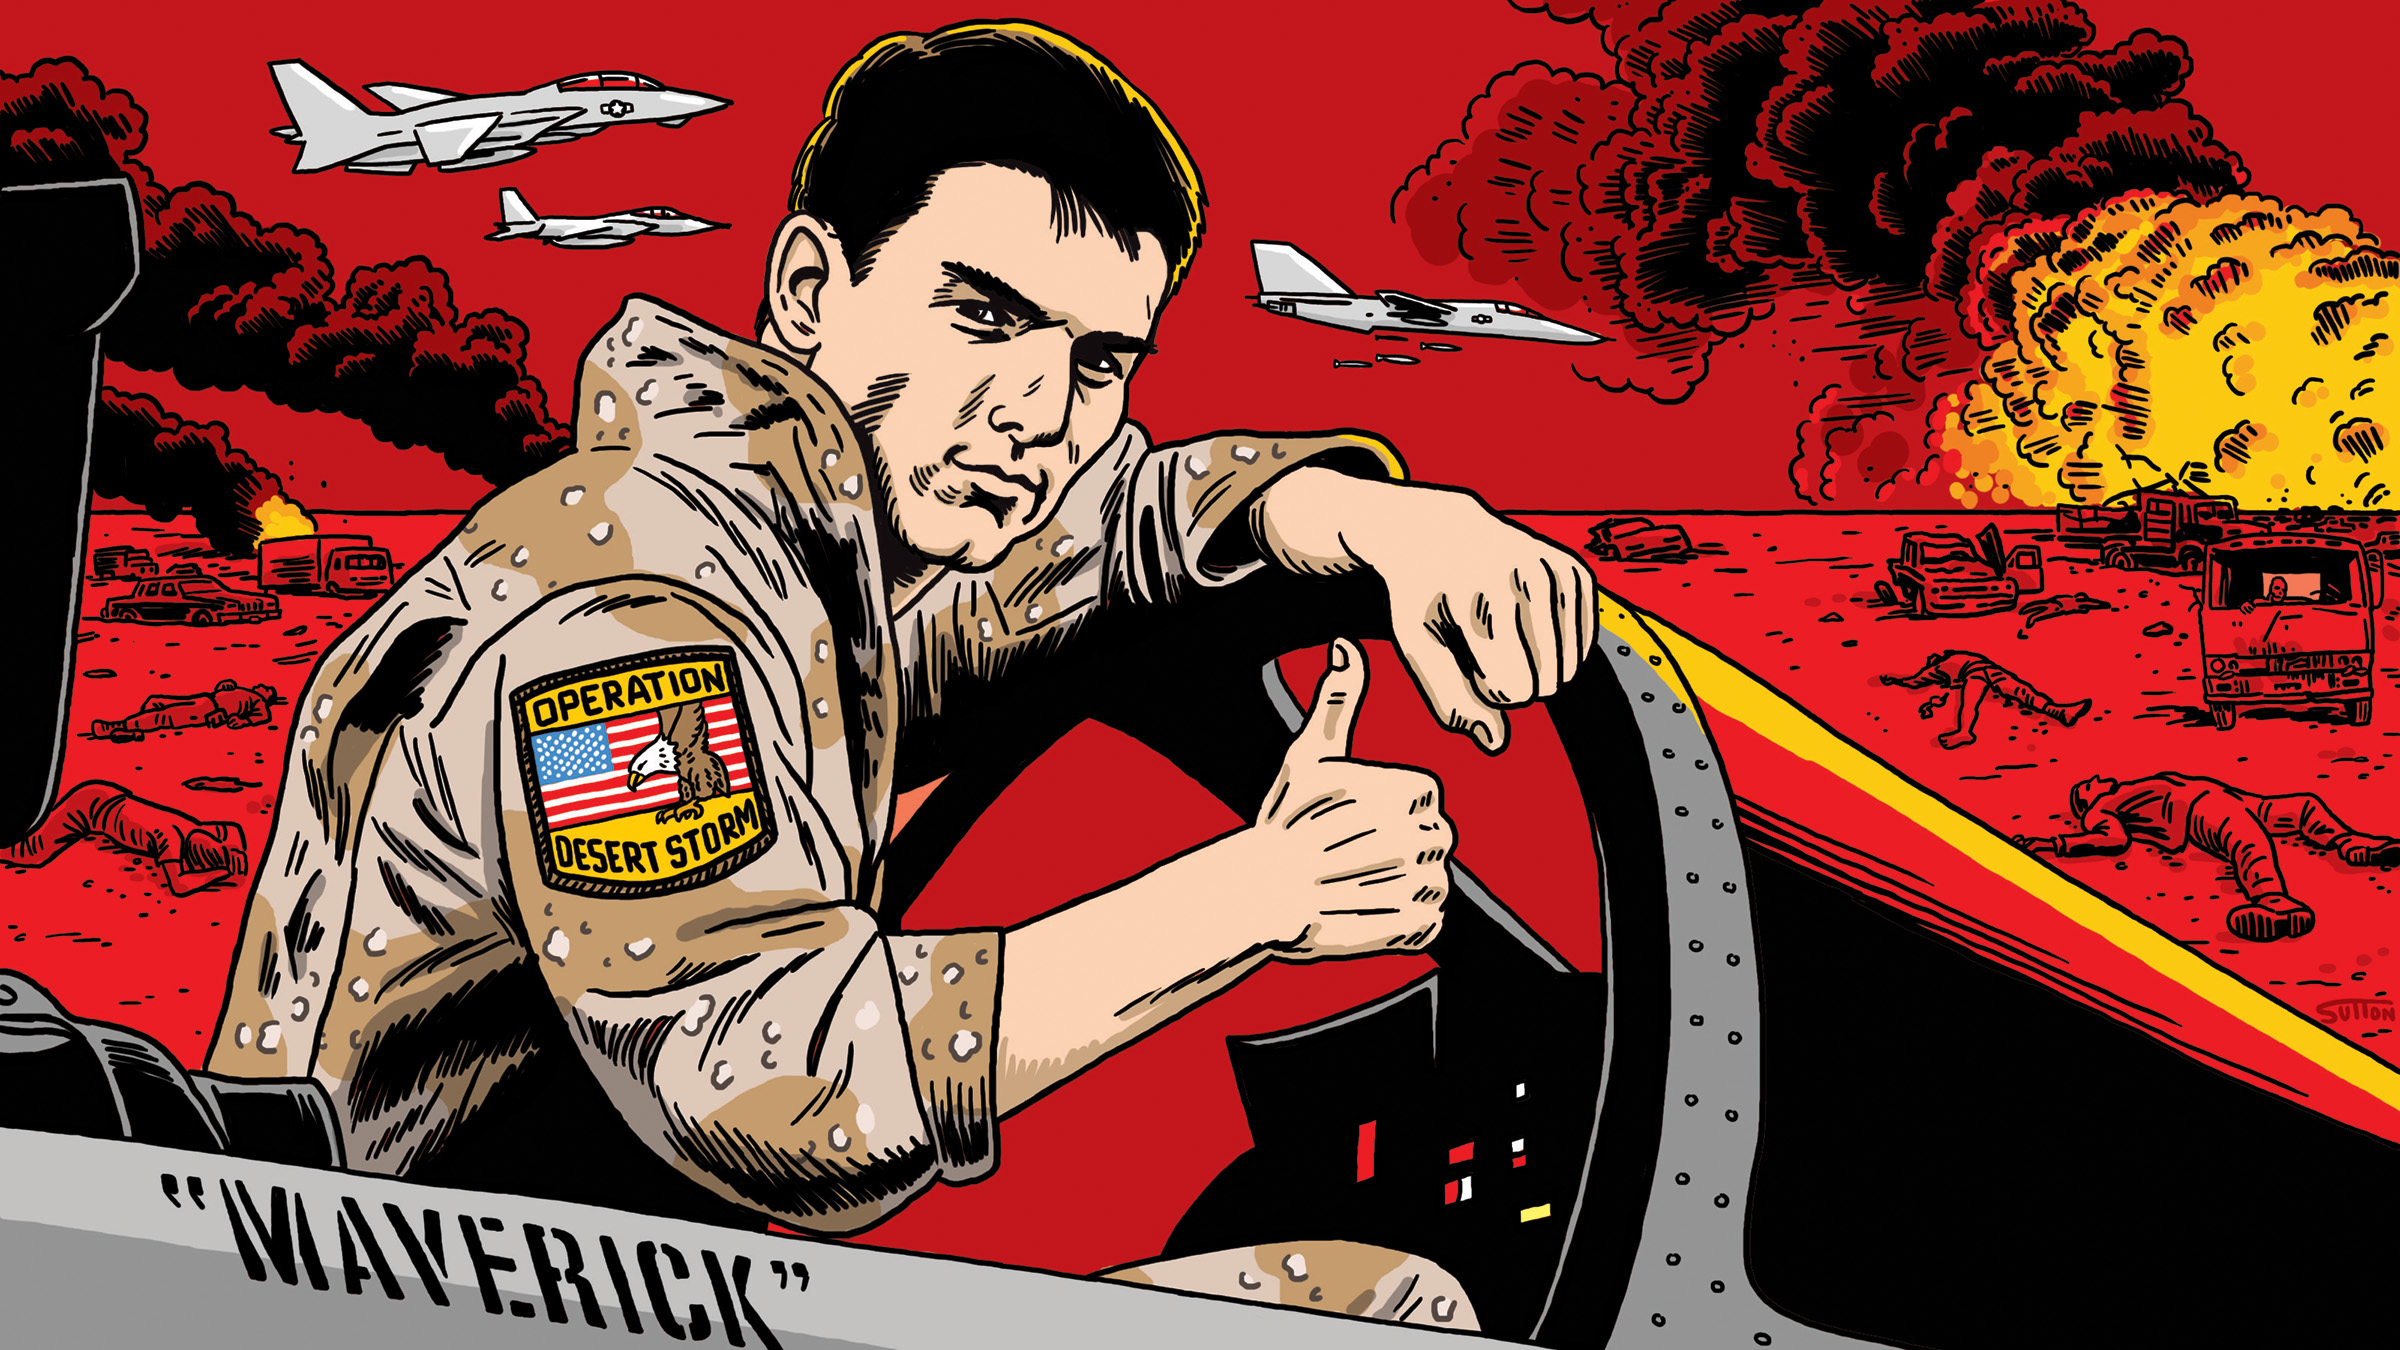 How the US Military Gave Notes on 'Top Gun: Maverick